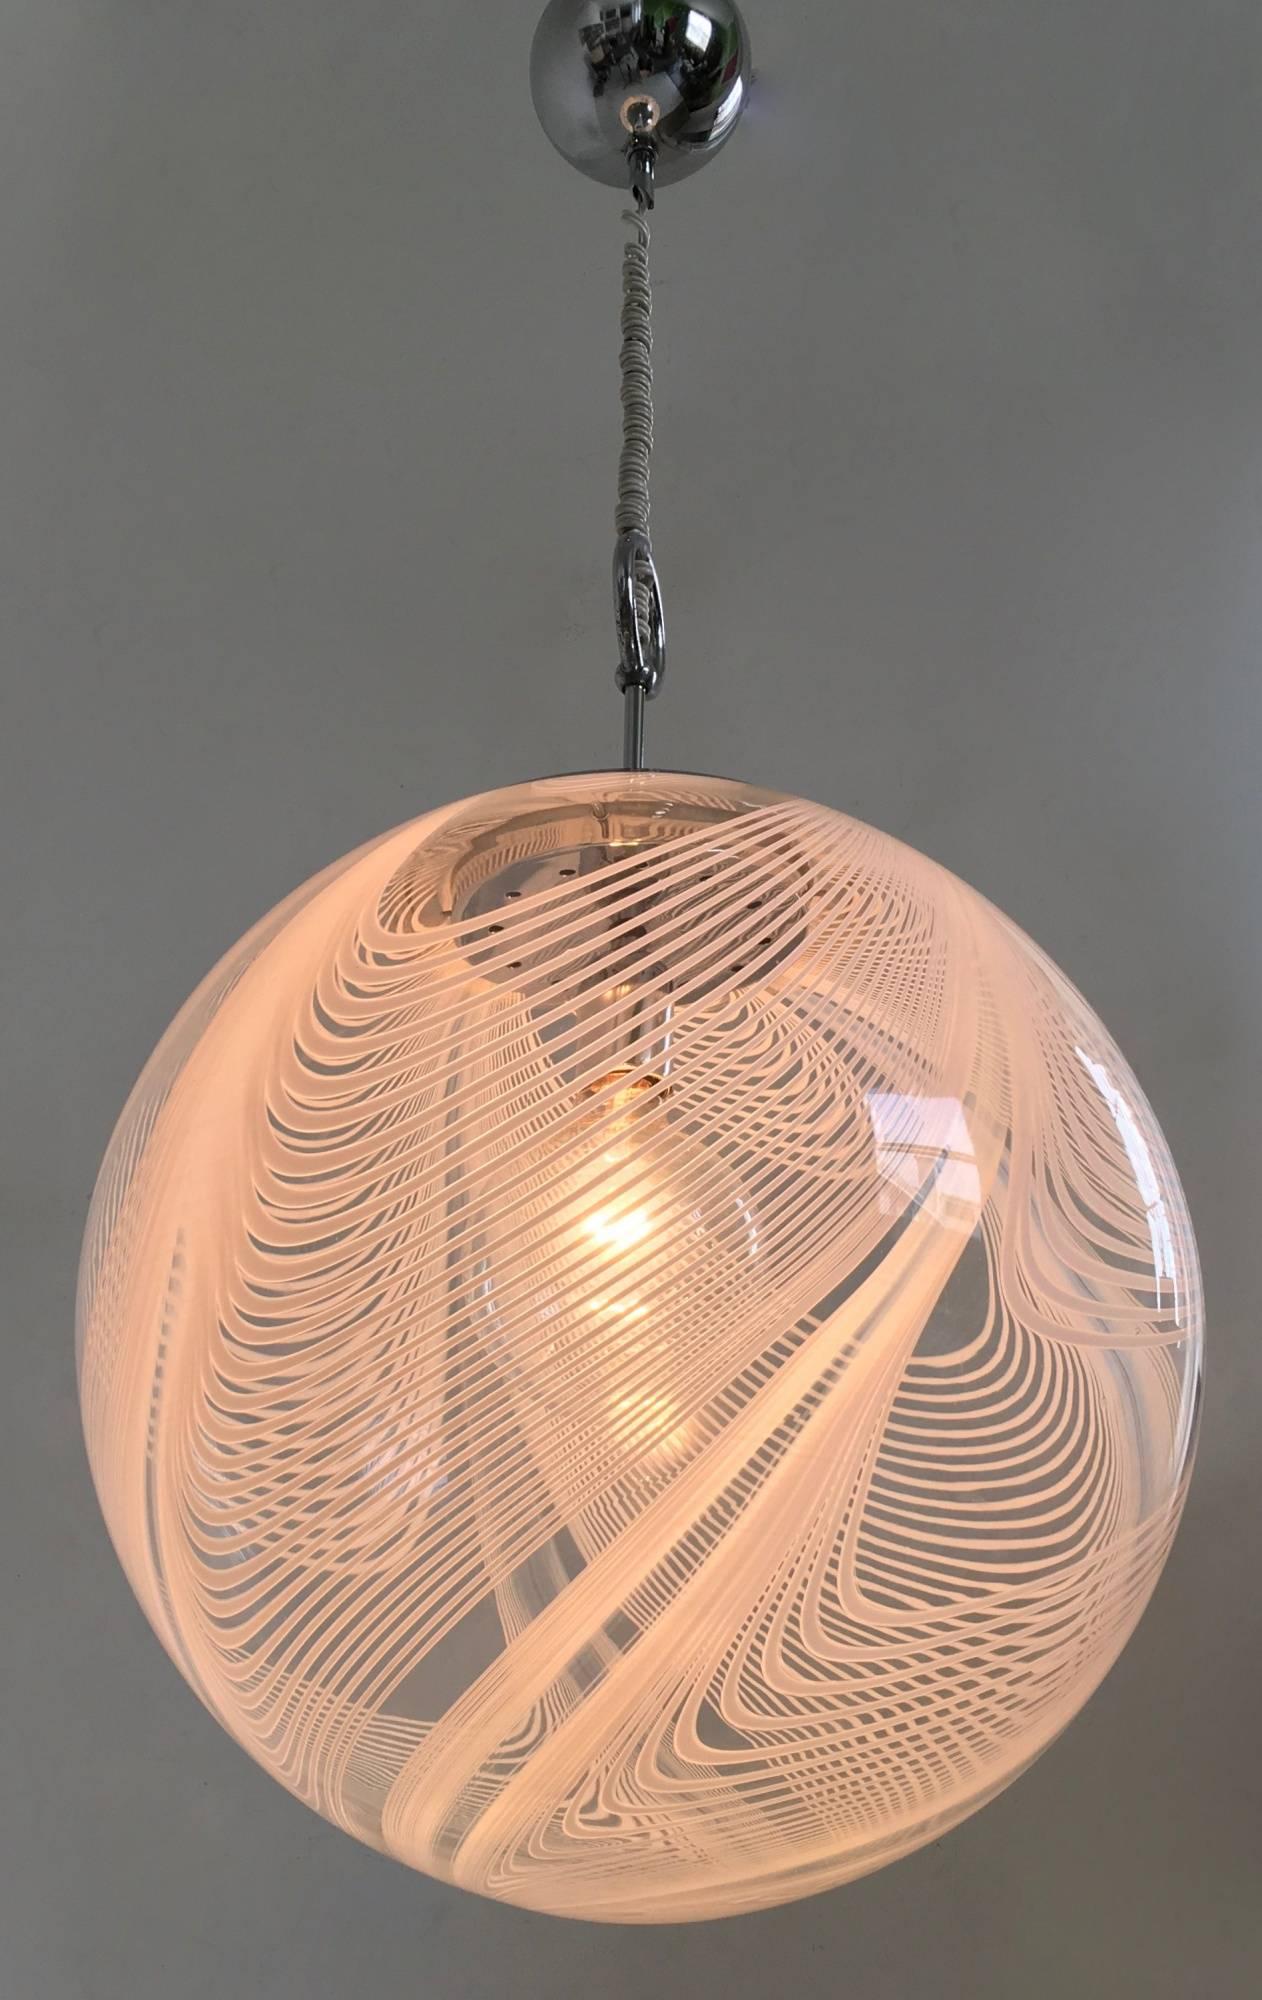 Made in Italy.
In Murano blown glass and chrome-plated metal. 
Its glass globe features smaller and larger swirled lines that create a beautiful pattern on the wall when turned on.
In perfect original condition and ready to give ambiance to any